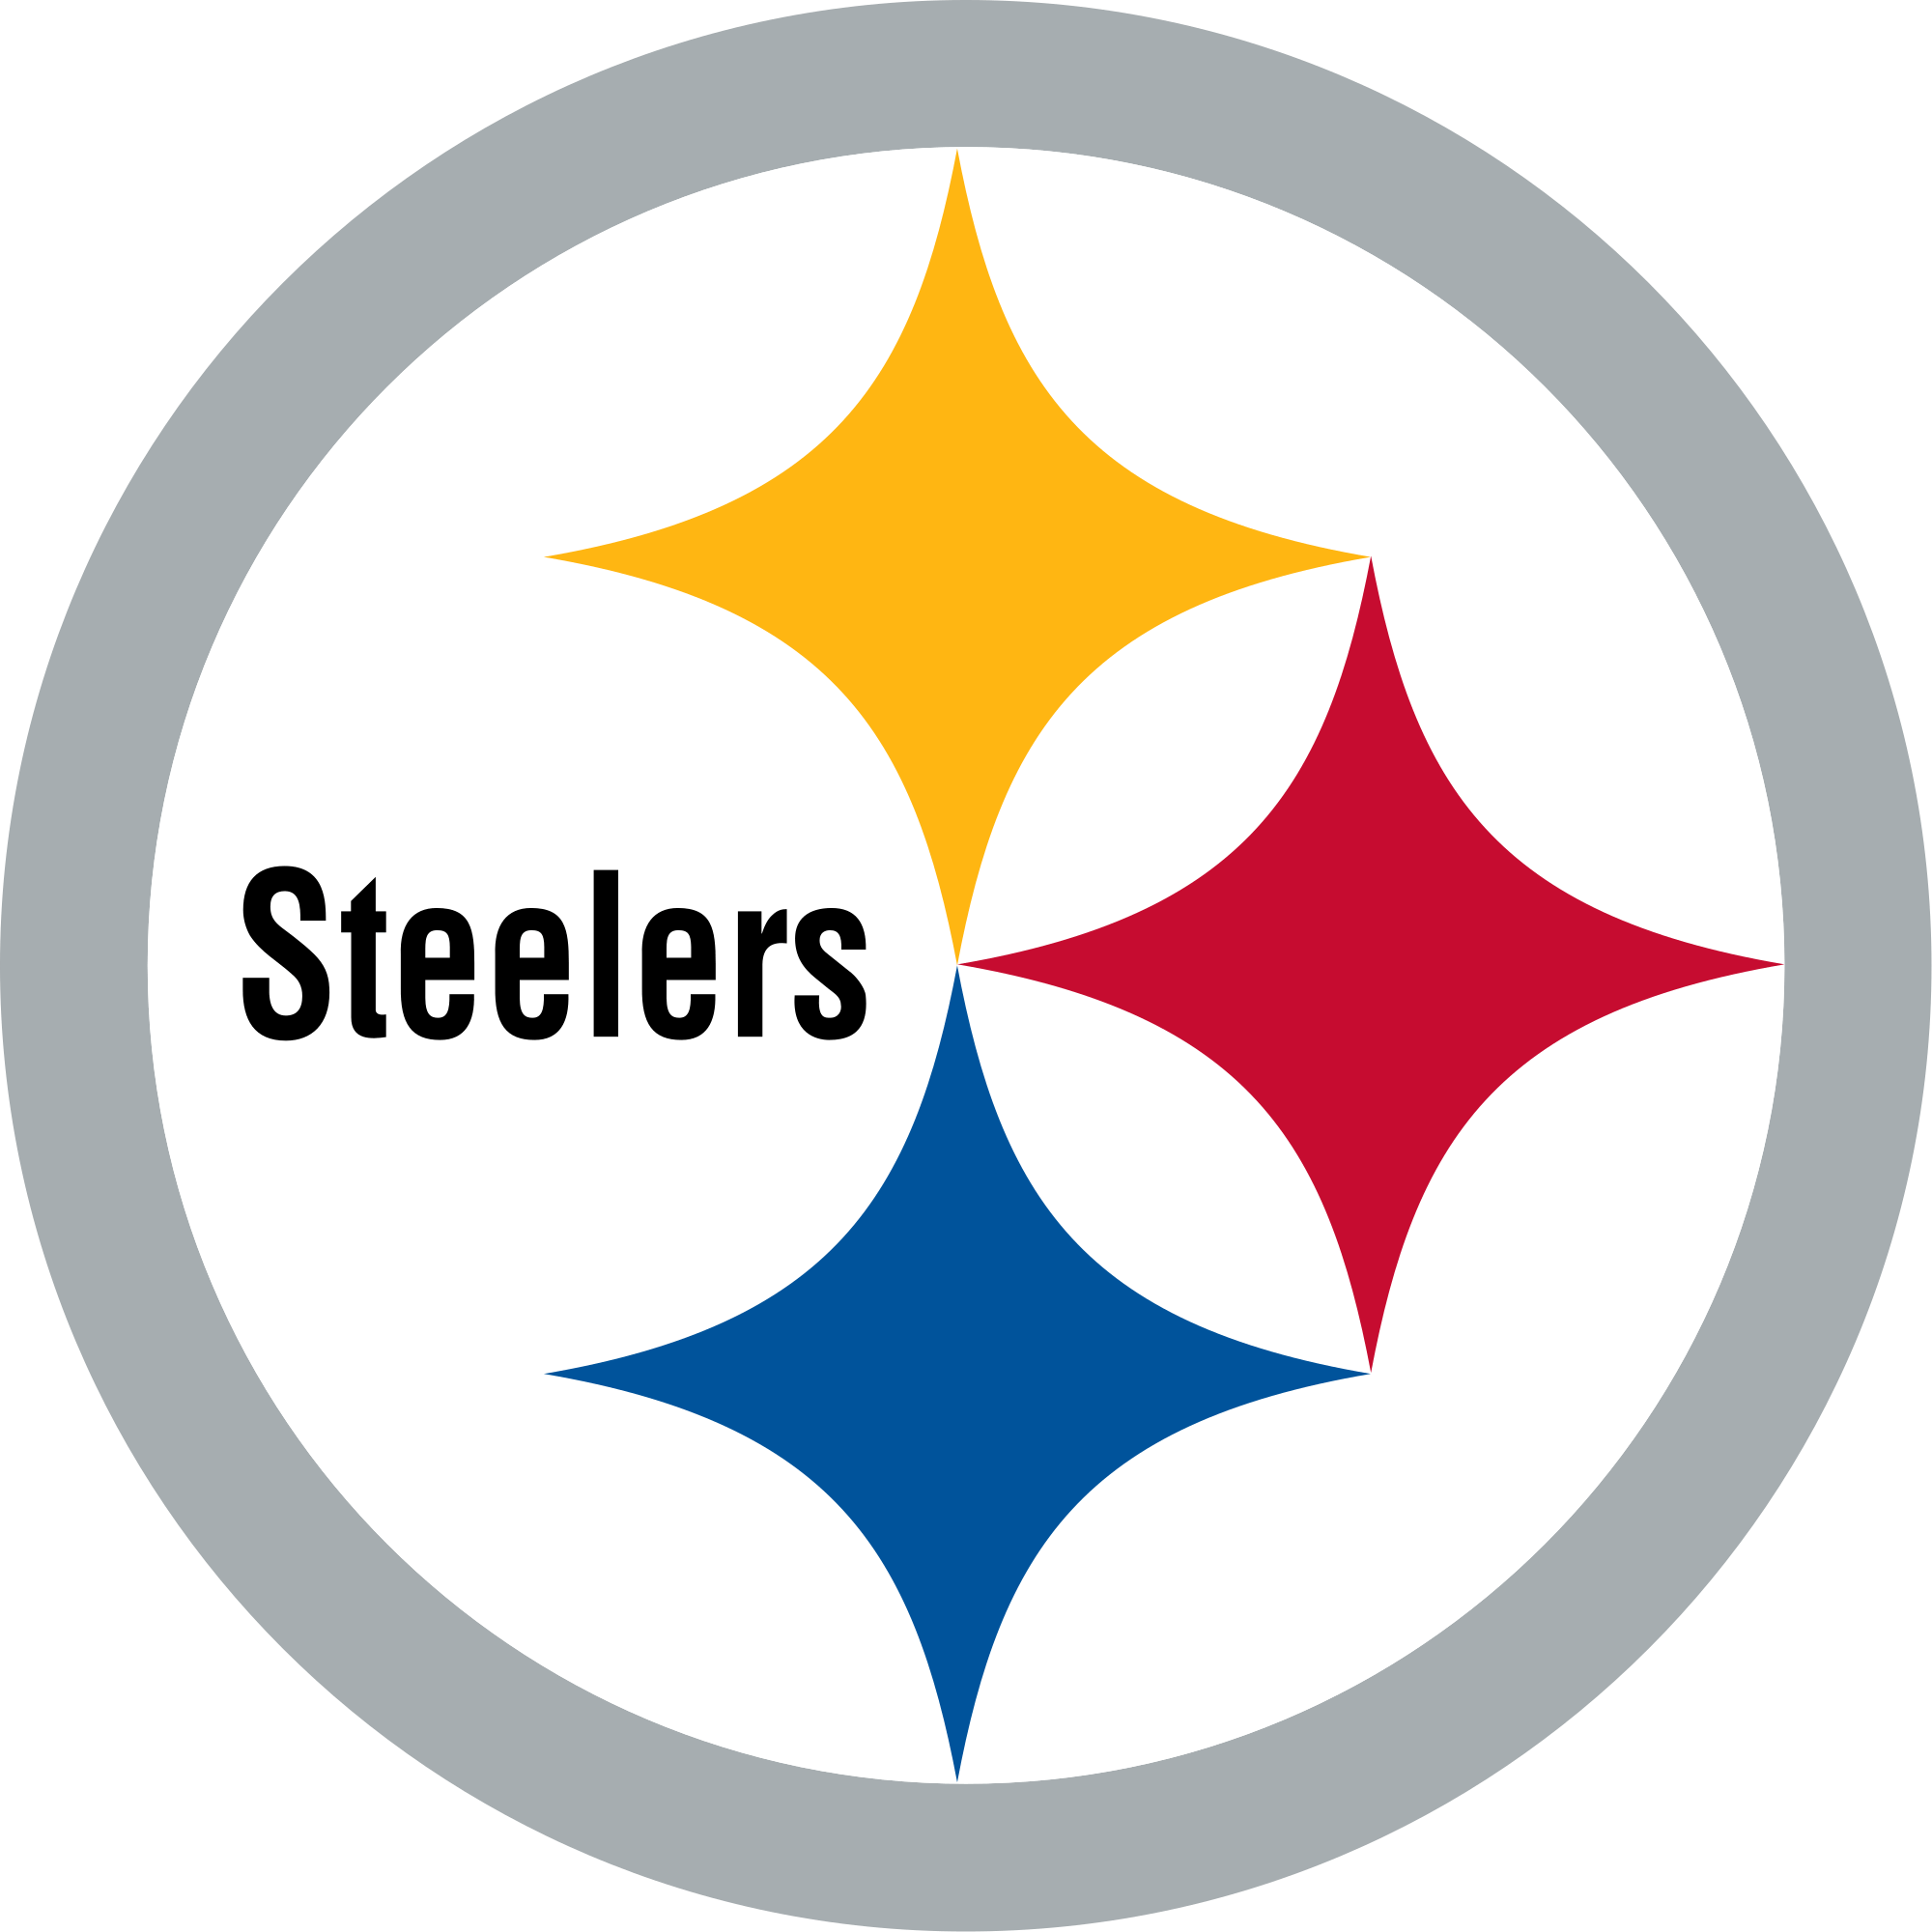 Download Jersey clipart pittsburgh steelers, Jersey pittsburgh ...